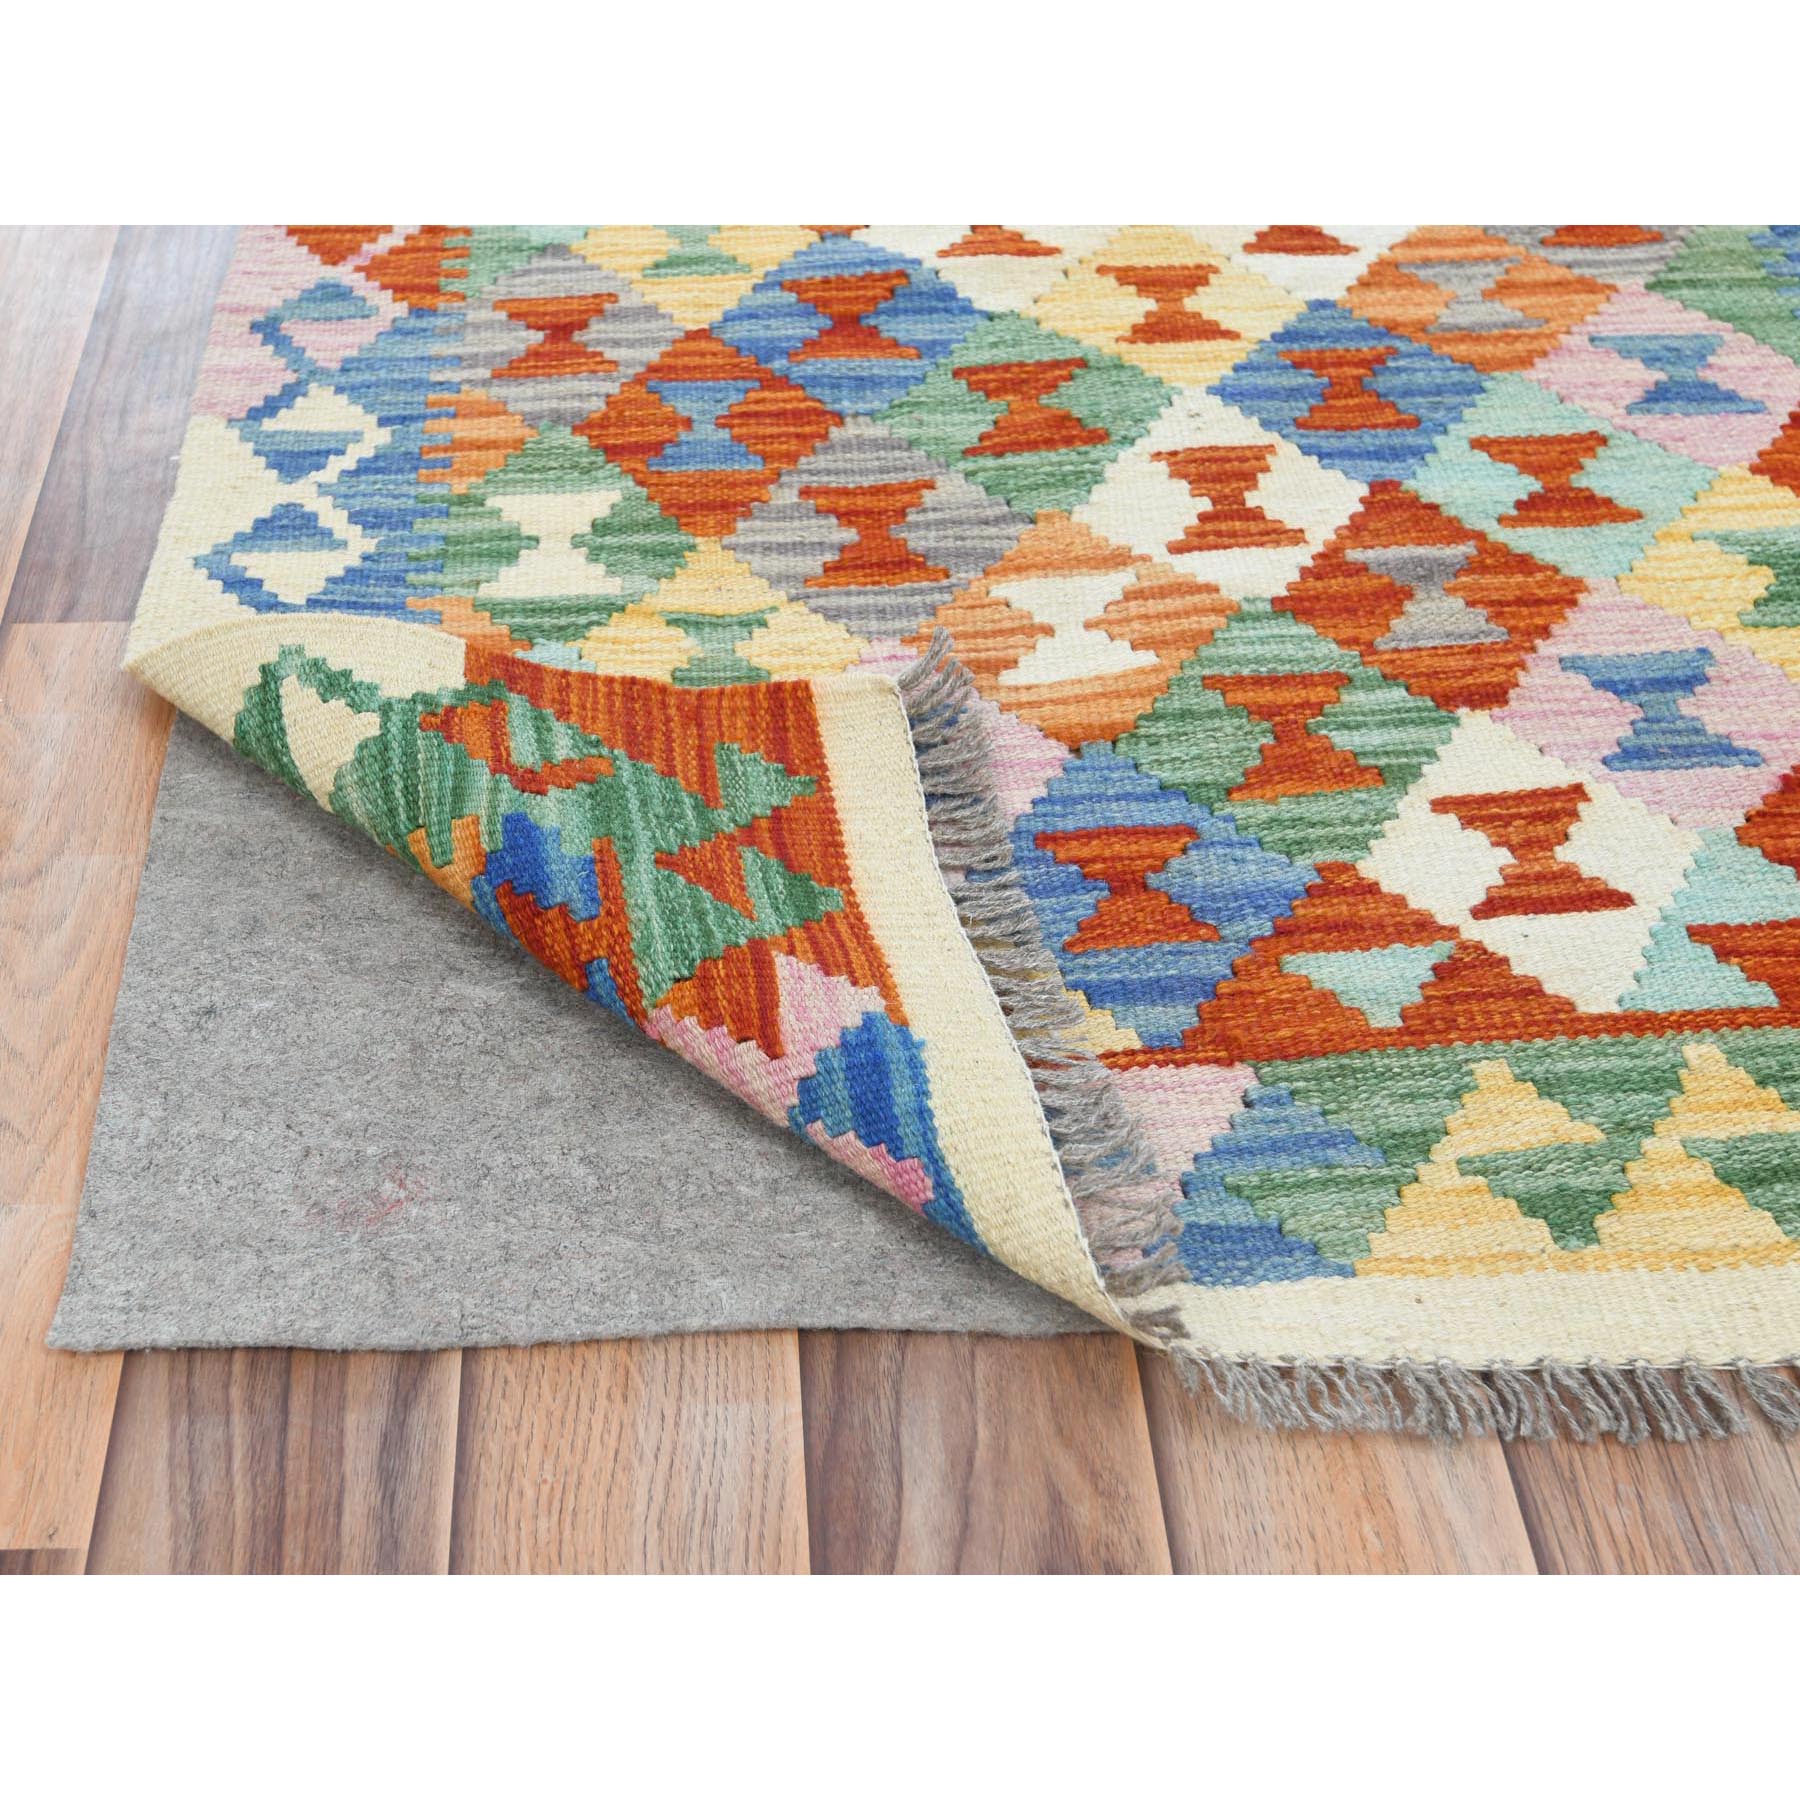 2'8"x15'9" Colorful, Hand Woven, Afghan Kilim with Geometric Design, Pure Wool, Vegetable Dyes, Flat Weave, Reversible XL Runner Oriental Rug 